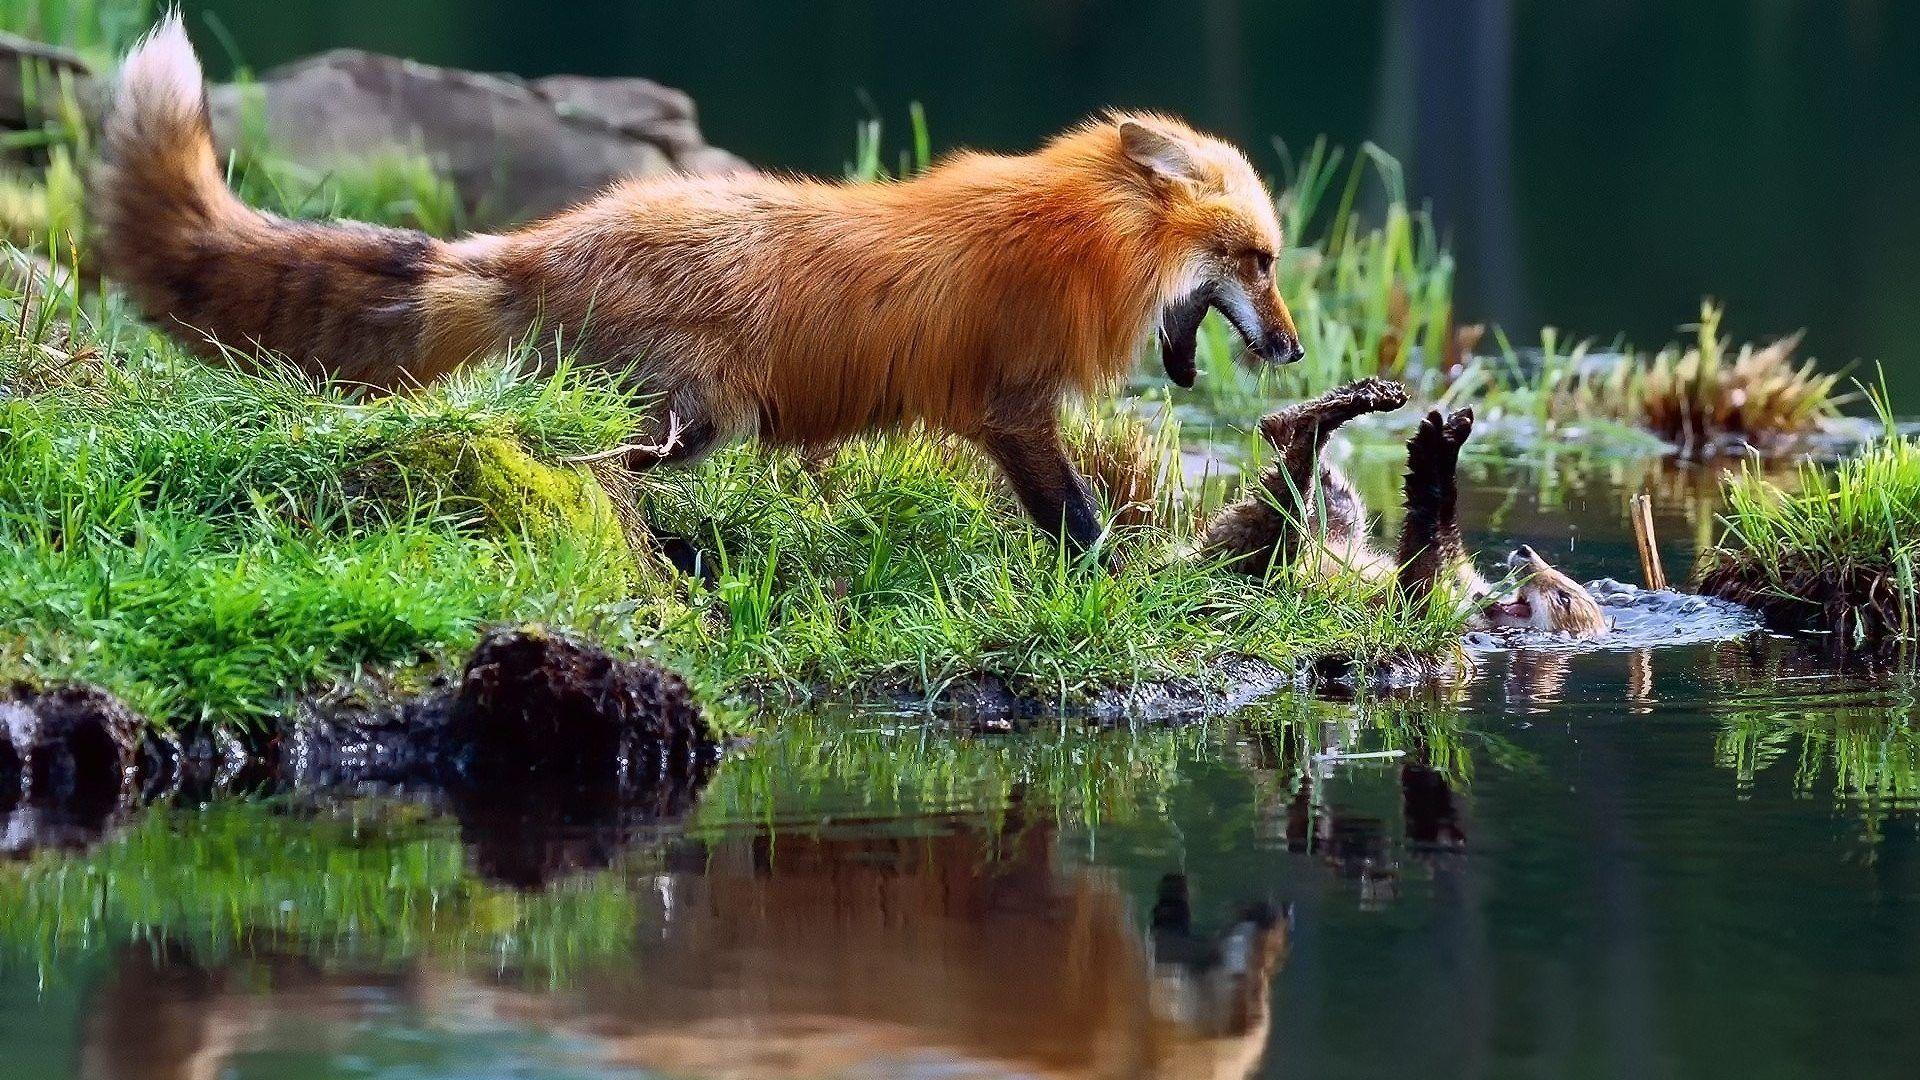 Baby Animals: Foxes Baby Red Fox Image Of Zoo Animals for HD 16:9